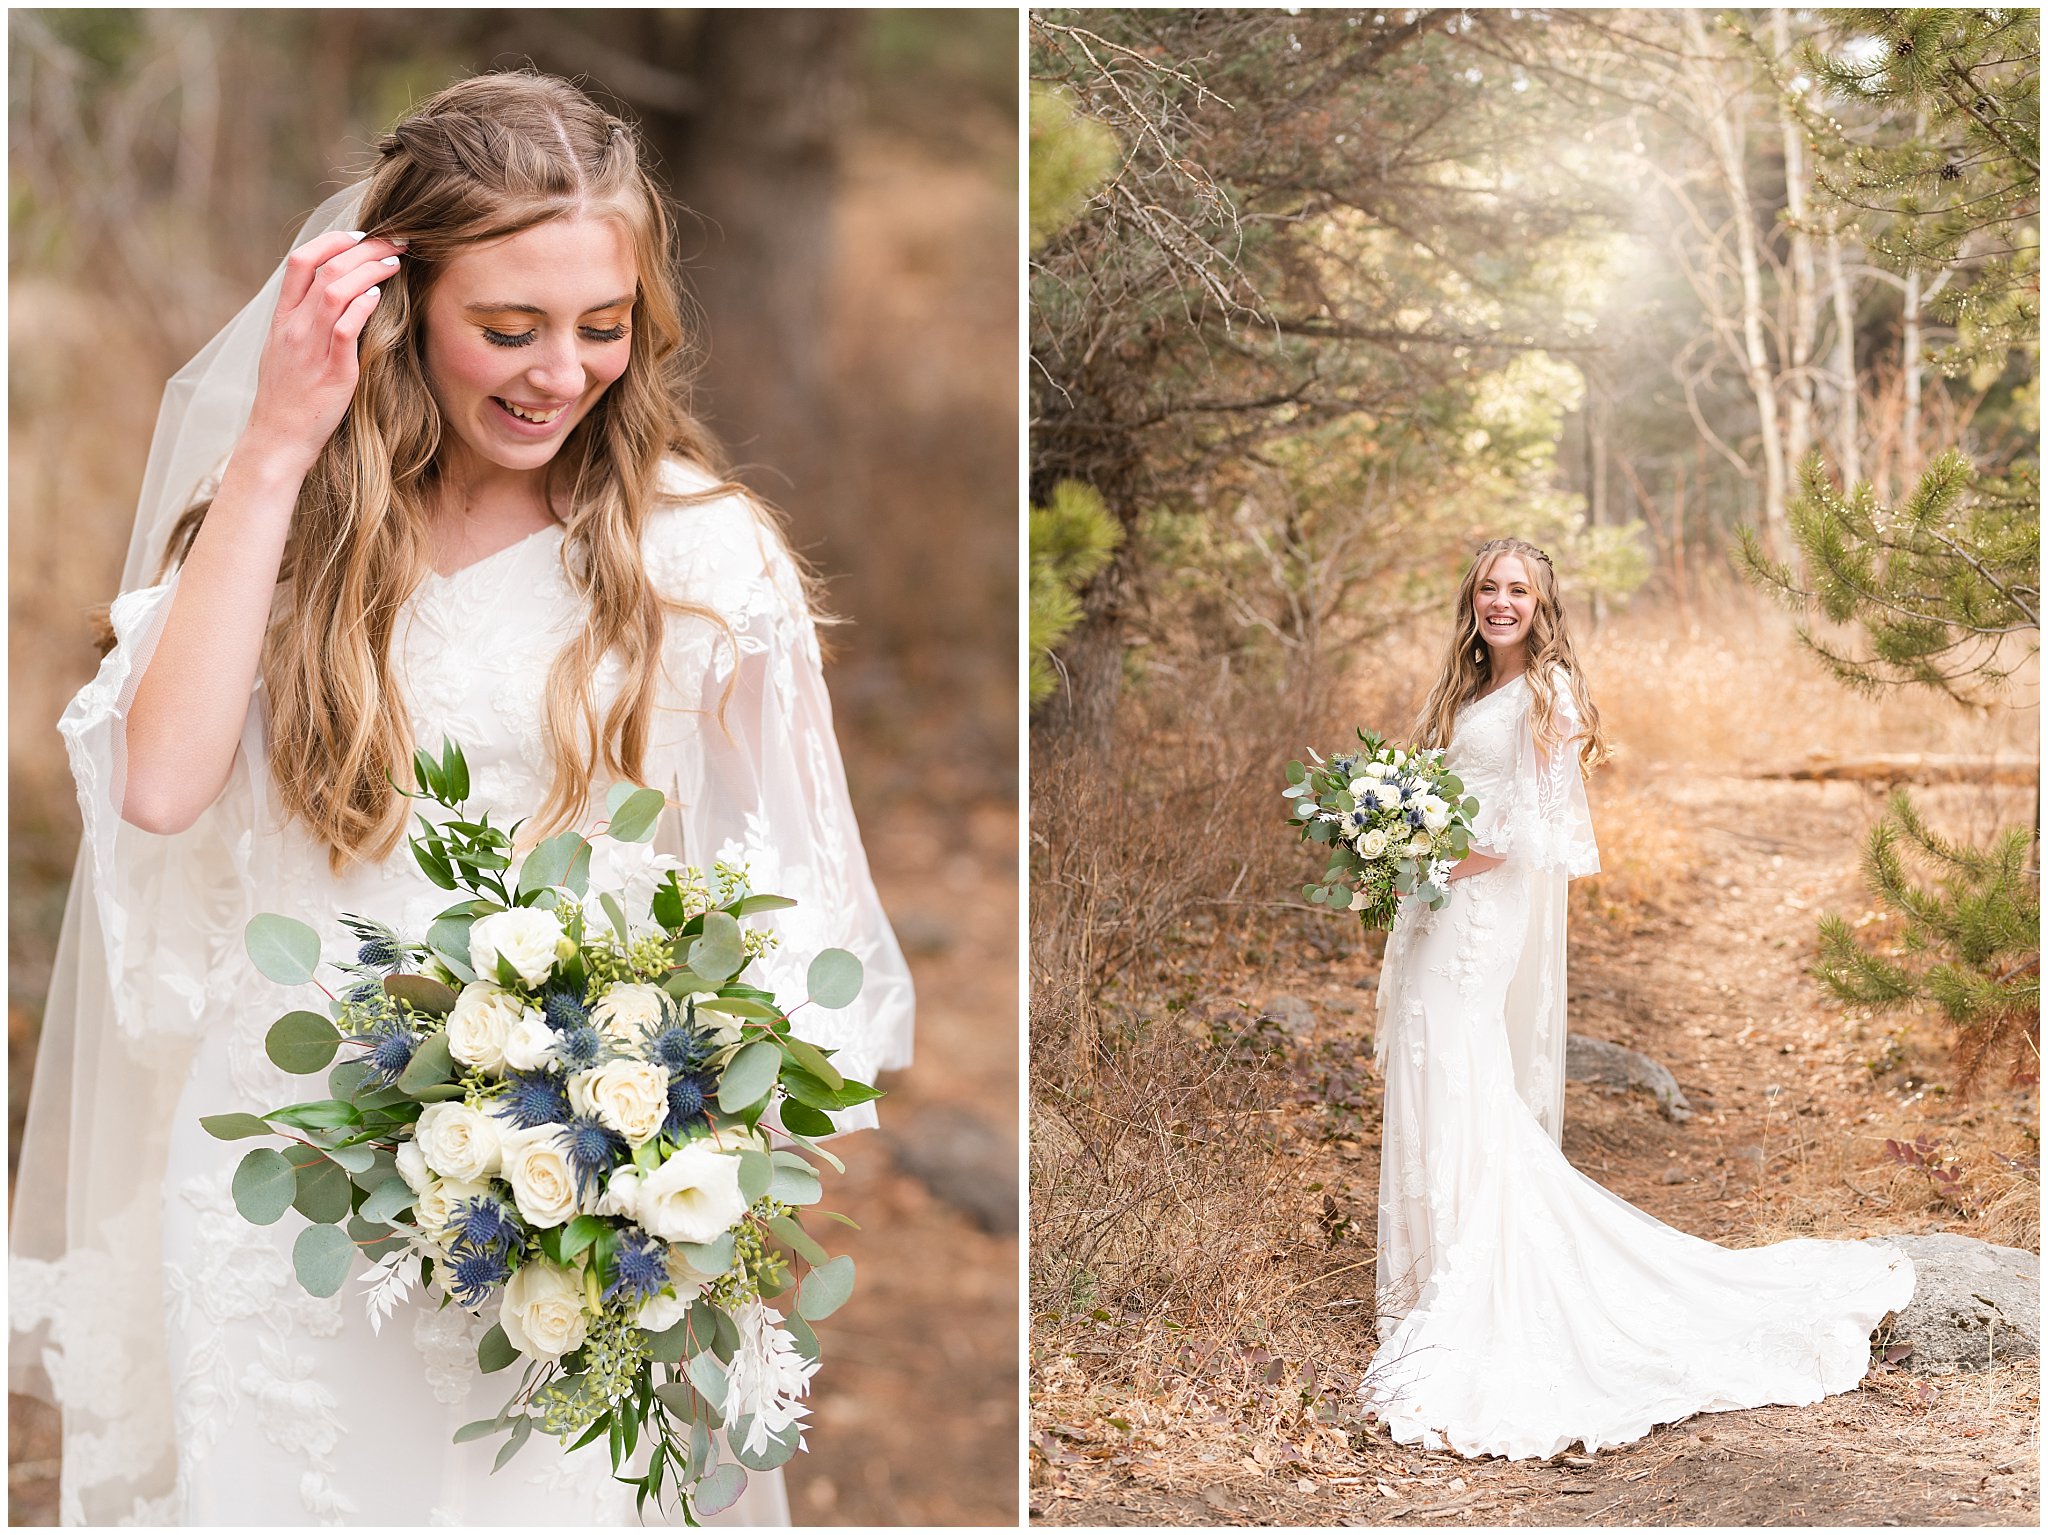 Bride in the mountains wearing lace dress with veil and white floral bouquet | Tibble Fork Winter Formal Session | Jessie and Dallin Photography